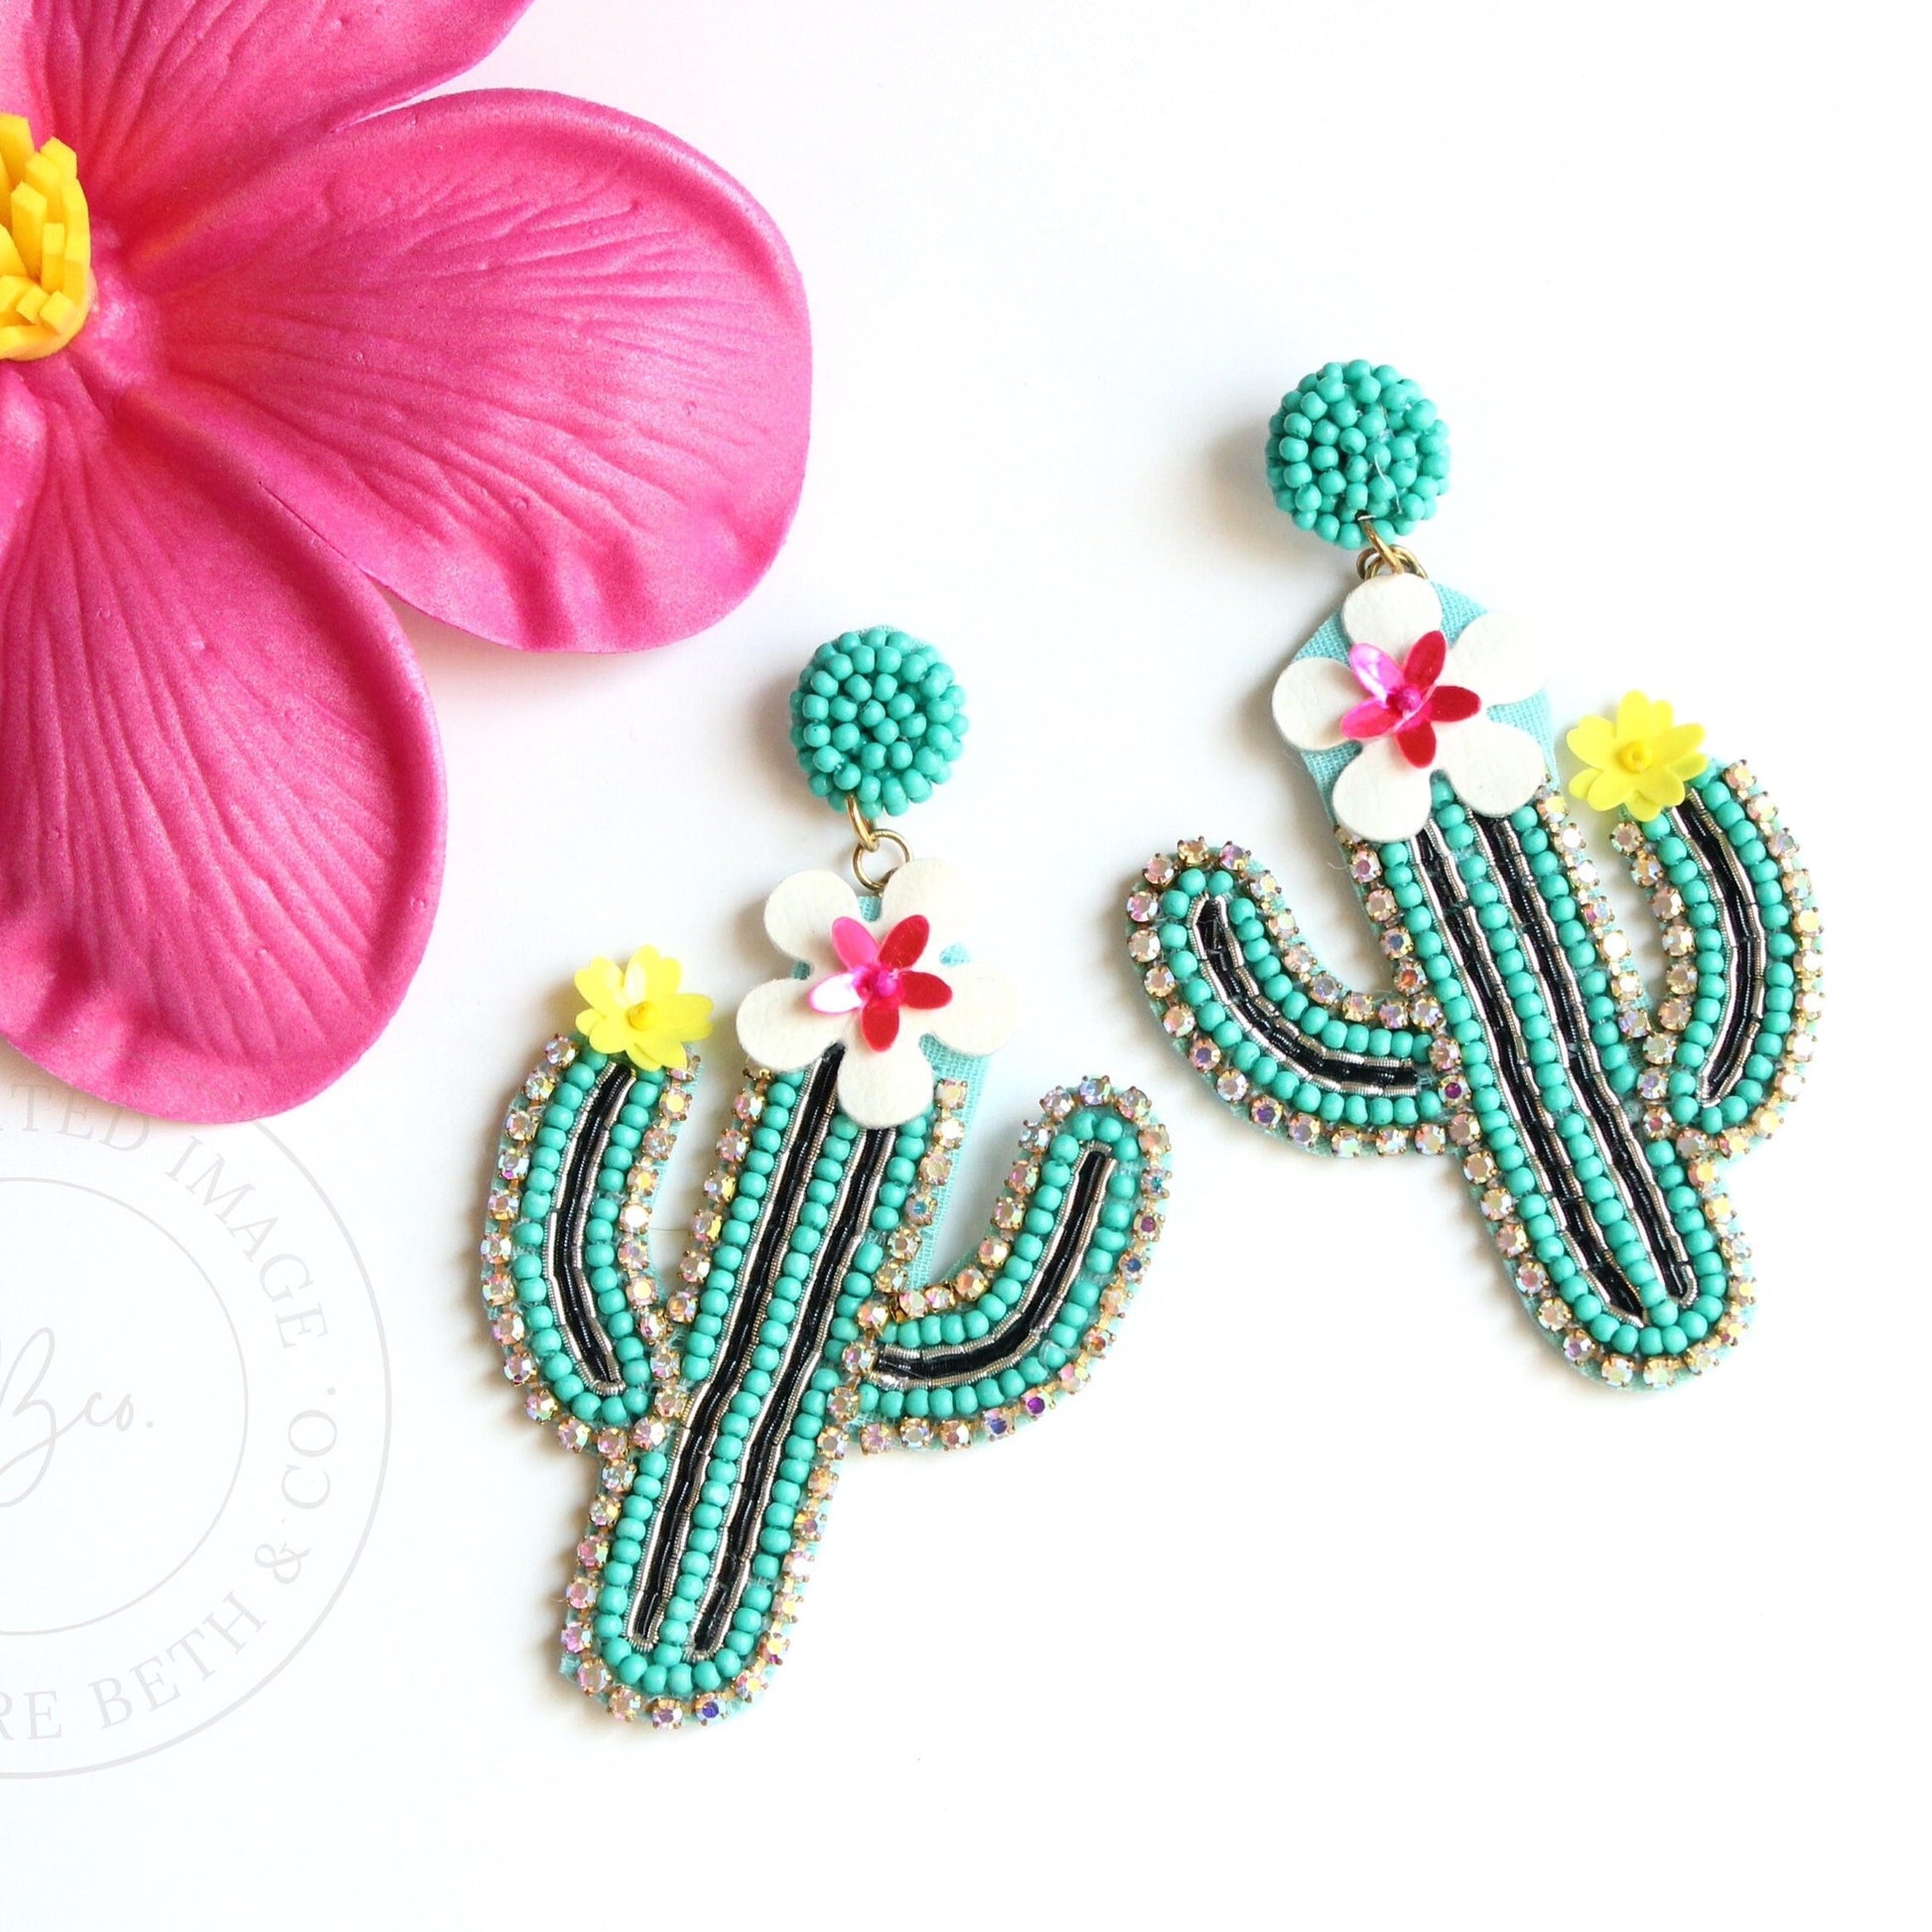 floral cactus beaded earrings on flat surface next to hot pink flower